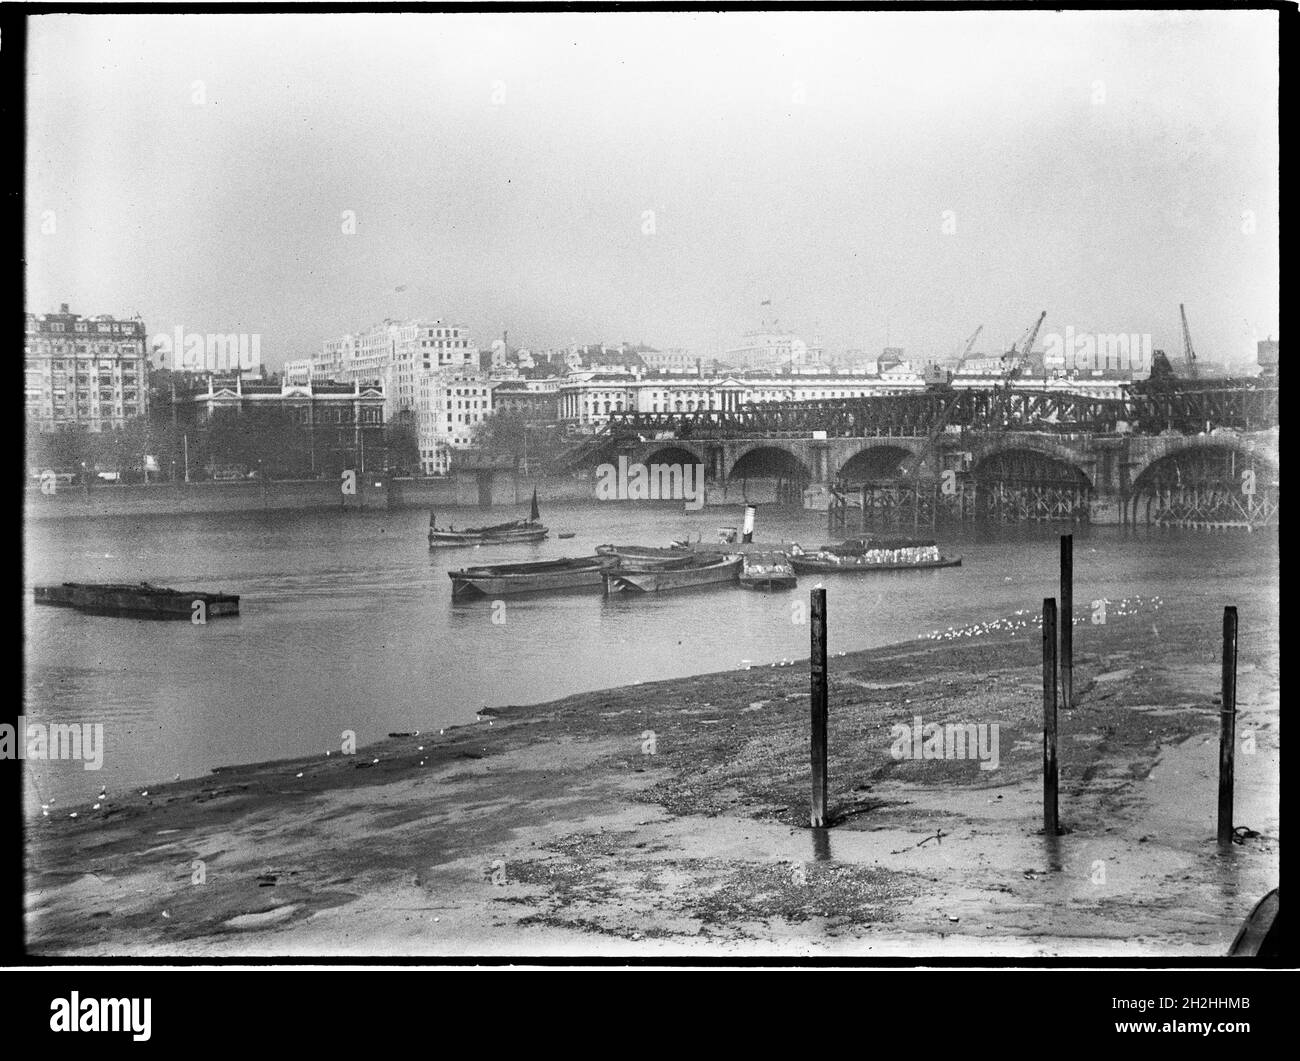 Demolition of Waterloo Bridge, Lambeth, Greater London Authority, 1936. A view looking north-east across the River Thames showing the old Waterloo Bridge under demolition. The Waterloo Bridge was designed by John Rennie and opened in 1817. It was demolished in the 1930s with another bridge replacing it in the 1940s. Stock Photo